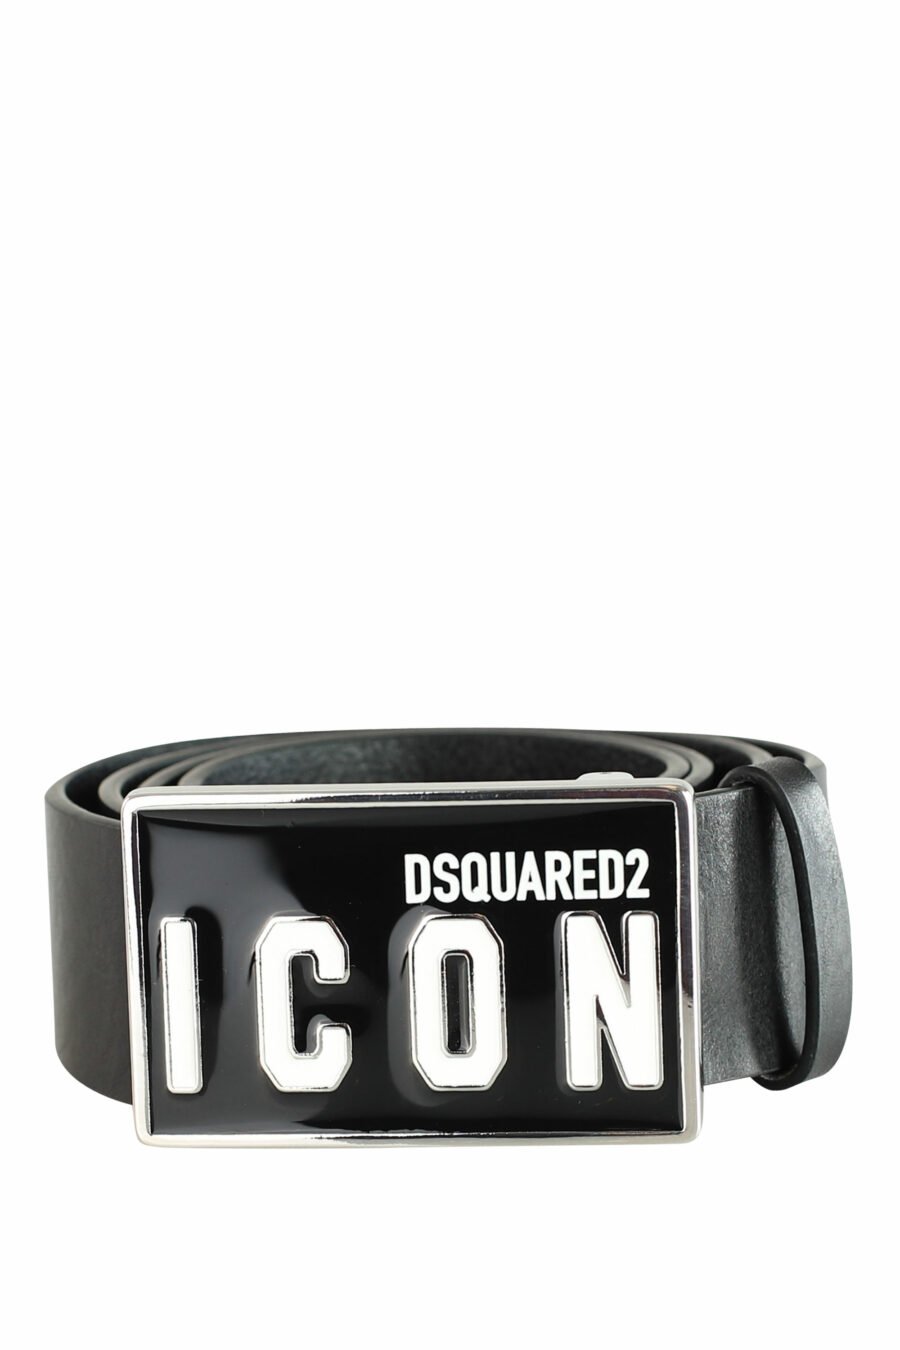 Black belt with double "icon" logo plate - IMG 1264